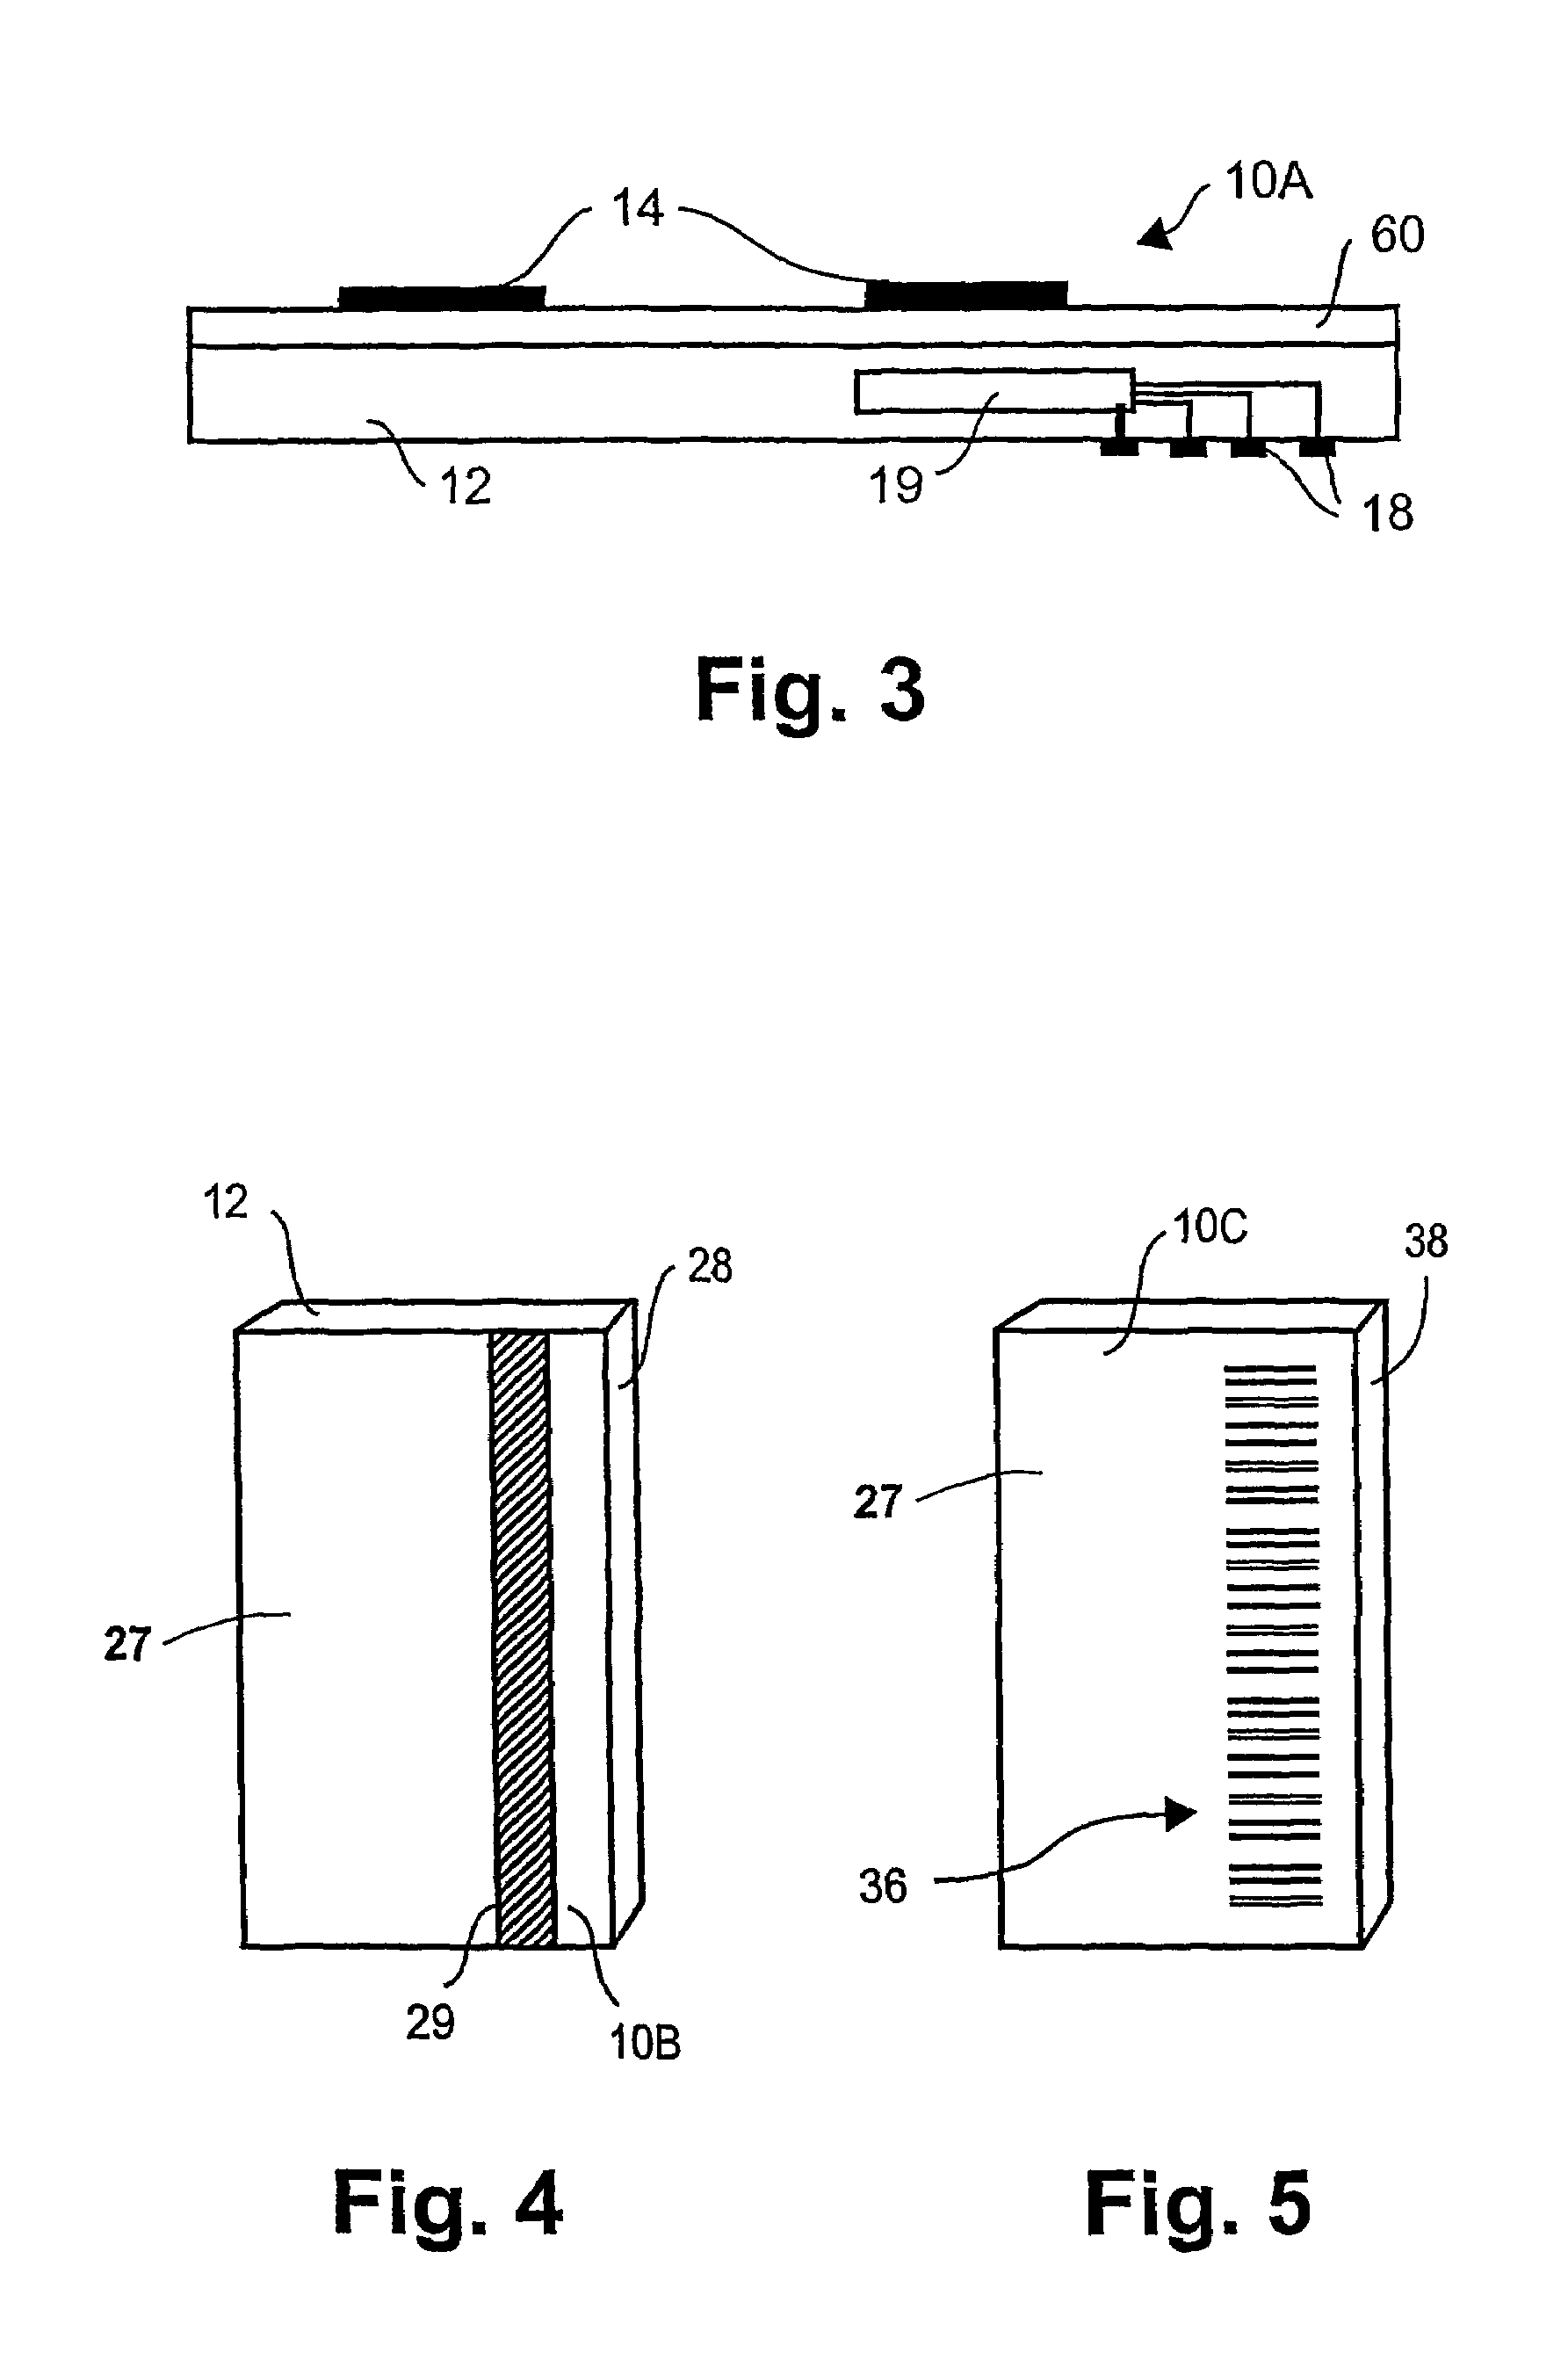 Card reading device for service access